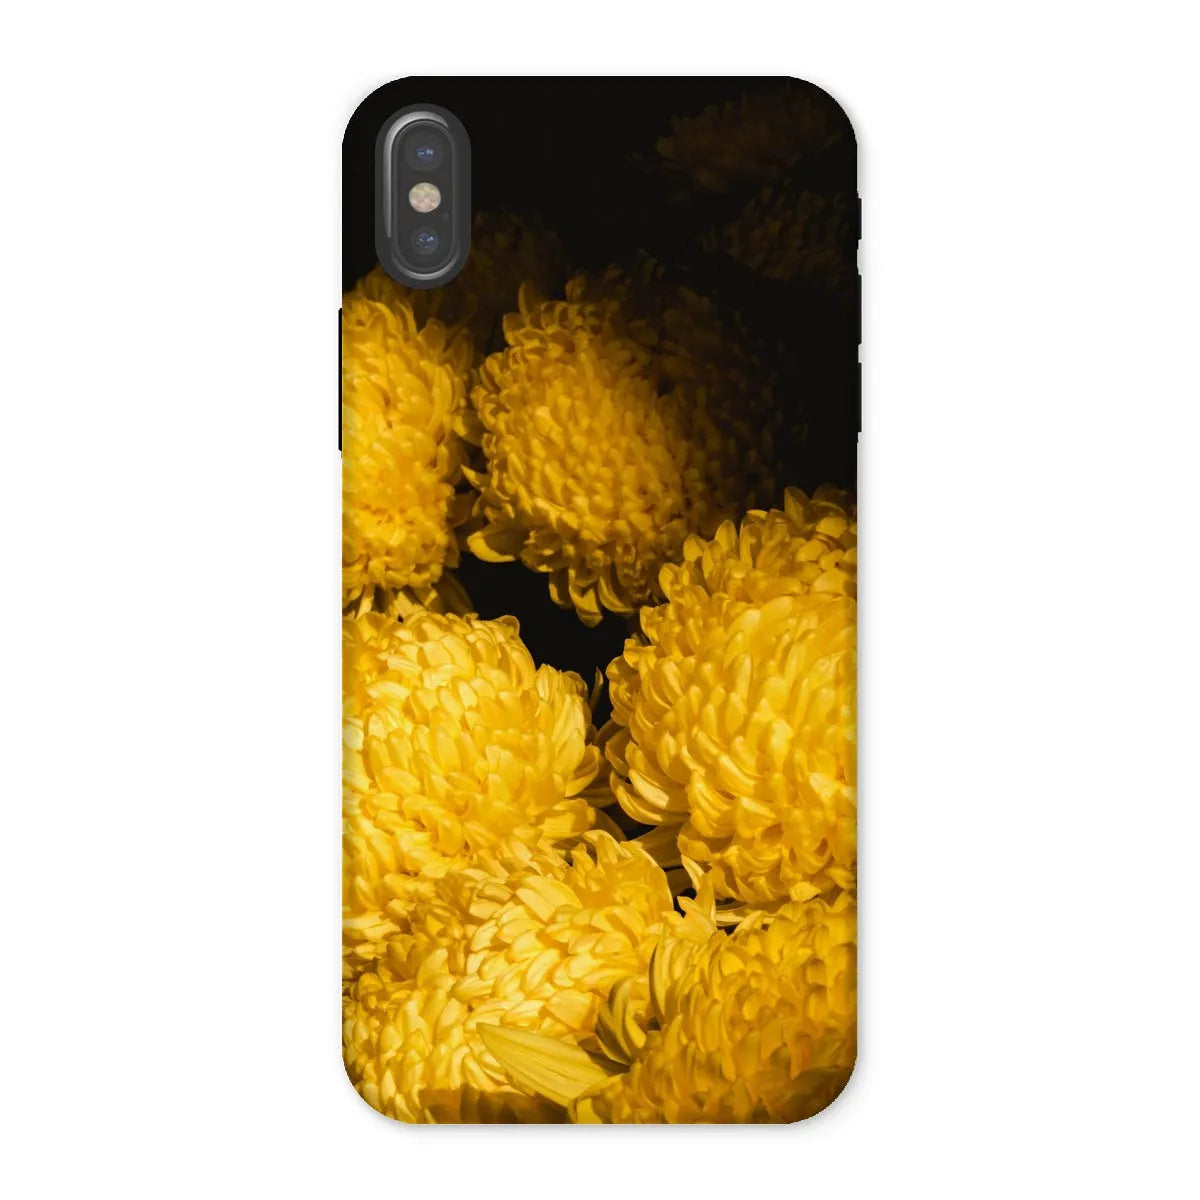 Field Of Dreams Tough Phone Case - Iphone x / Matte - Mobile Phone Cases - Aesthetic Art